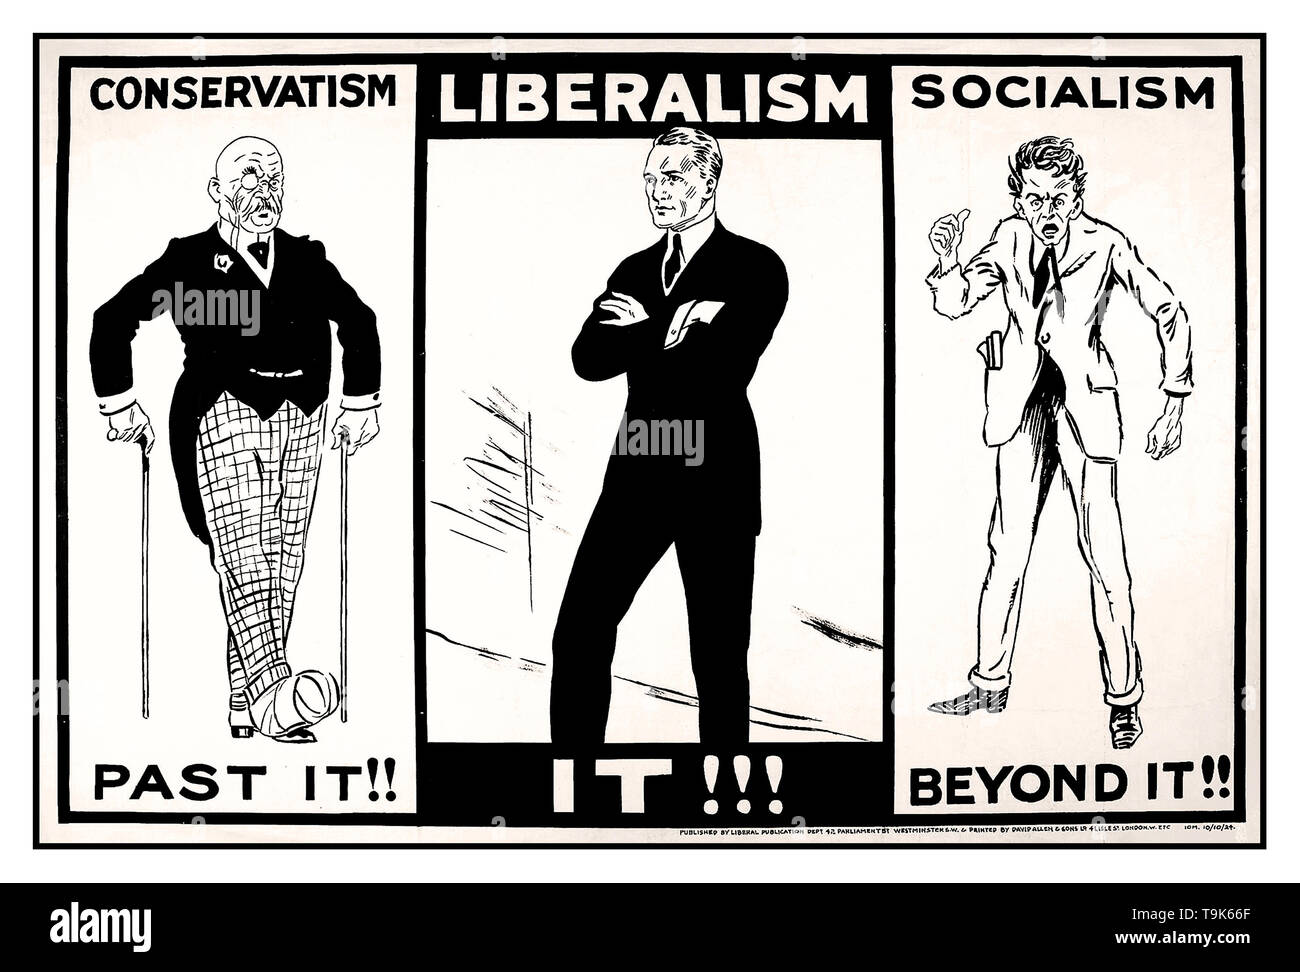 Vintage old historic UK British Political propaganda poster 1924 for The Liberal Party Poster - UK...Conservatism PAST IT..Liberalism IT !!! Socialism BEYOND IT !! Stock Photo